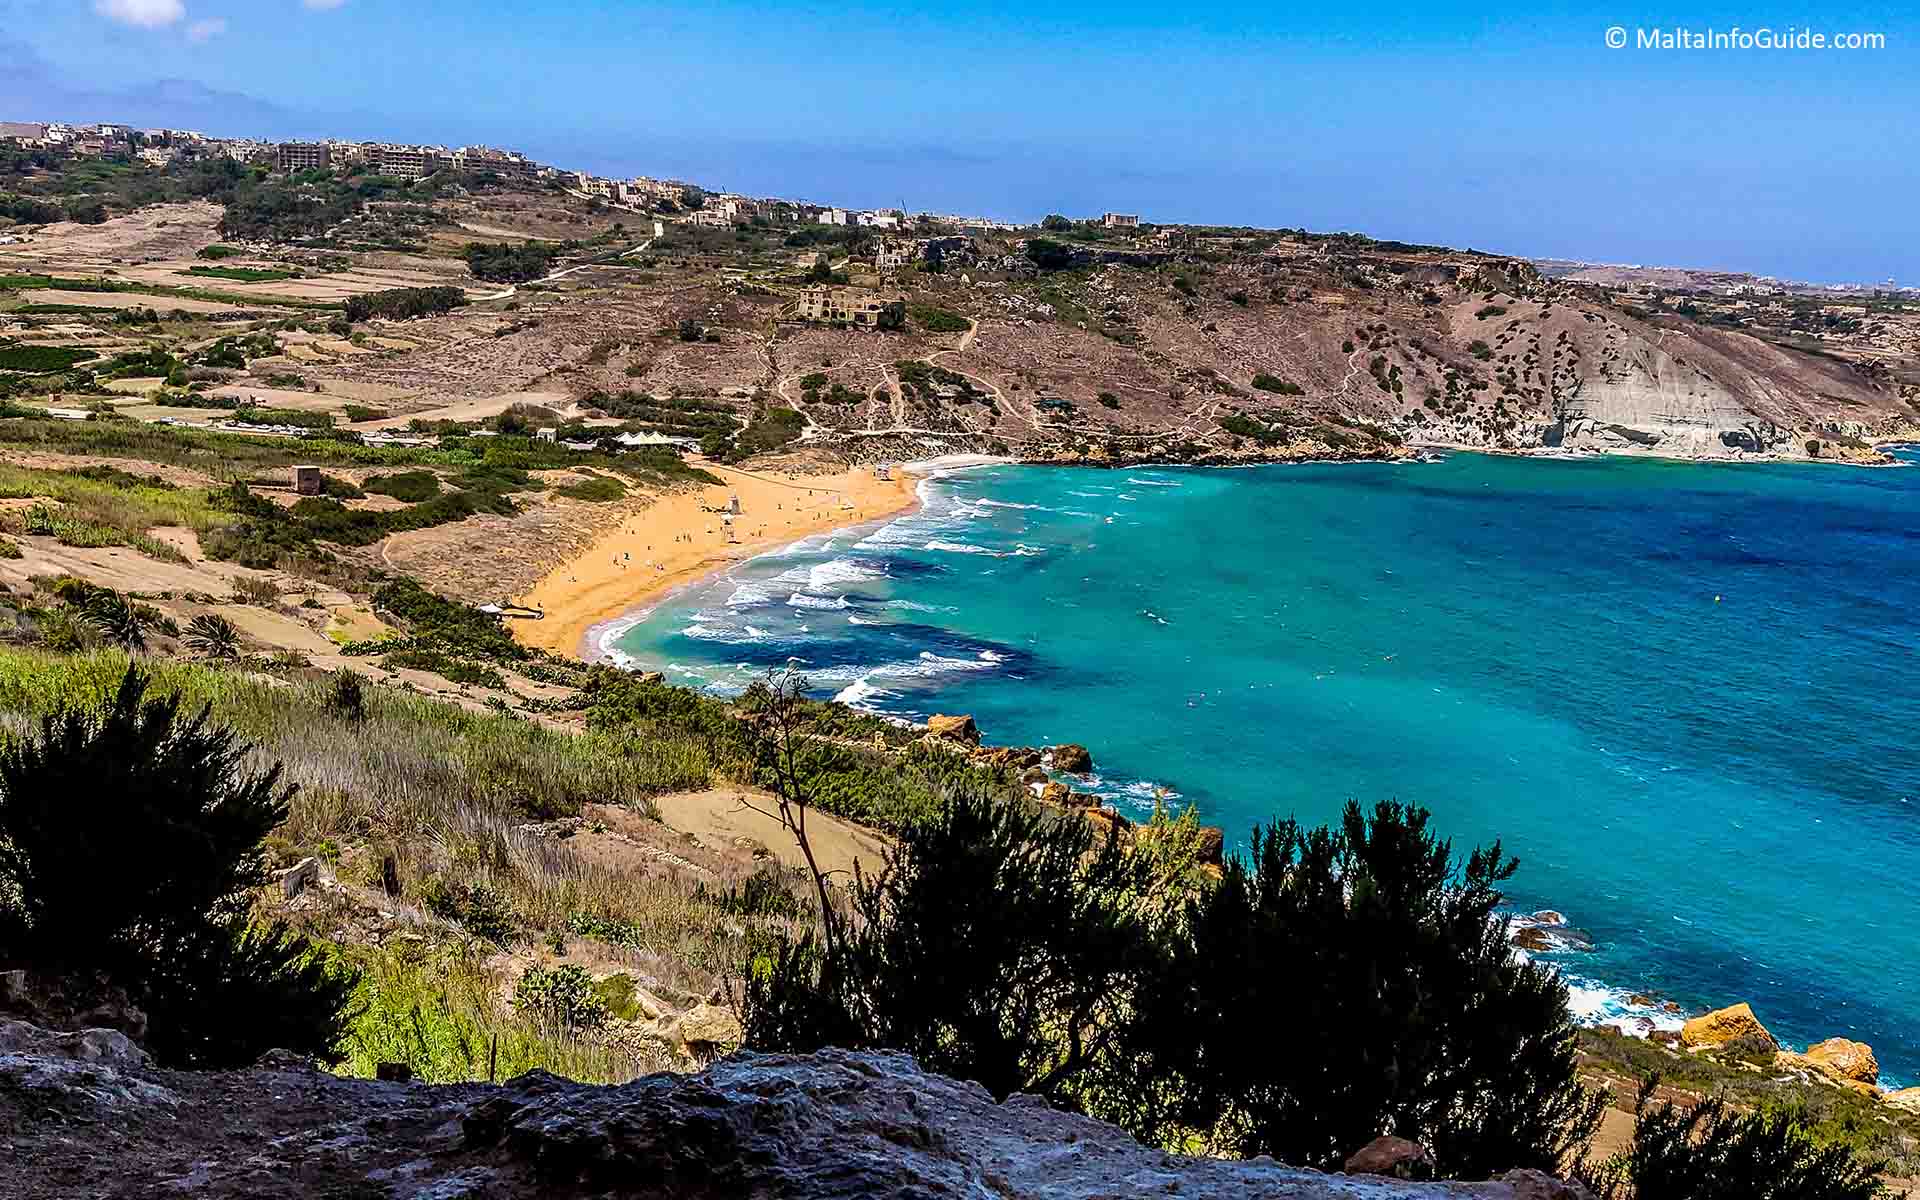 A direct view of Ramla L-Hamra bay from the cave in Gozo